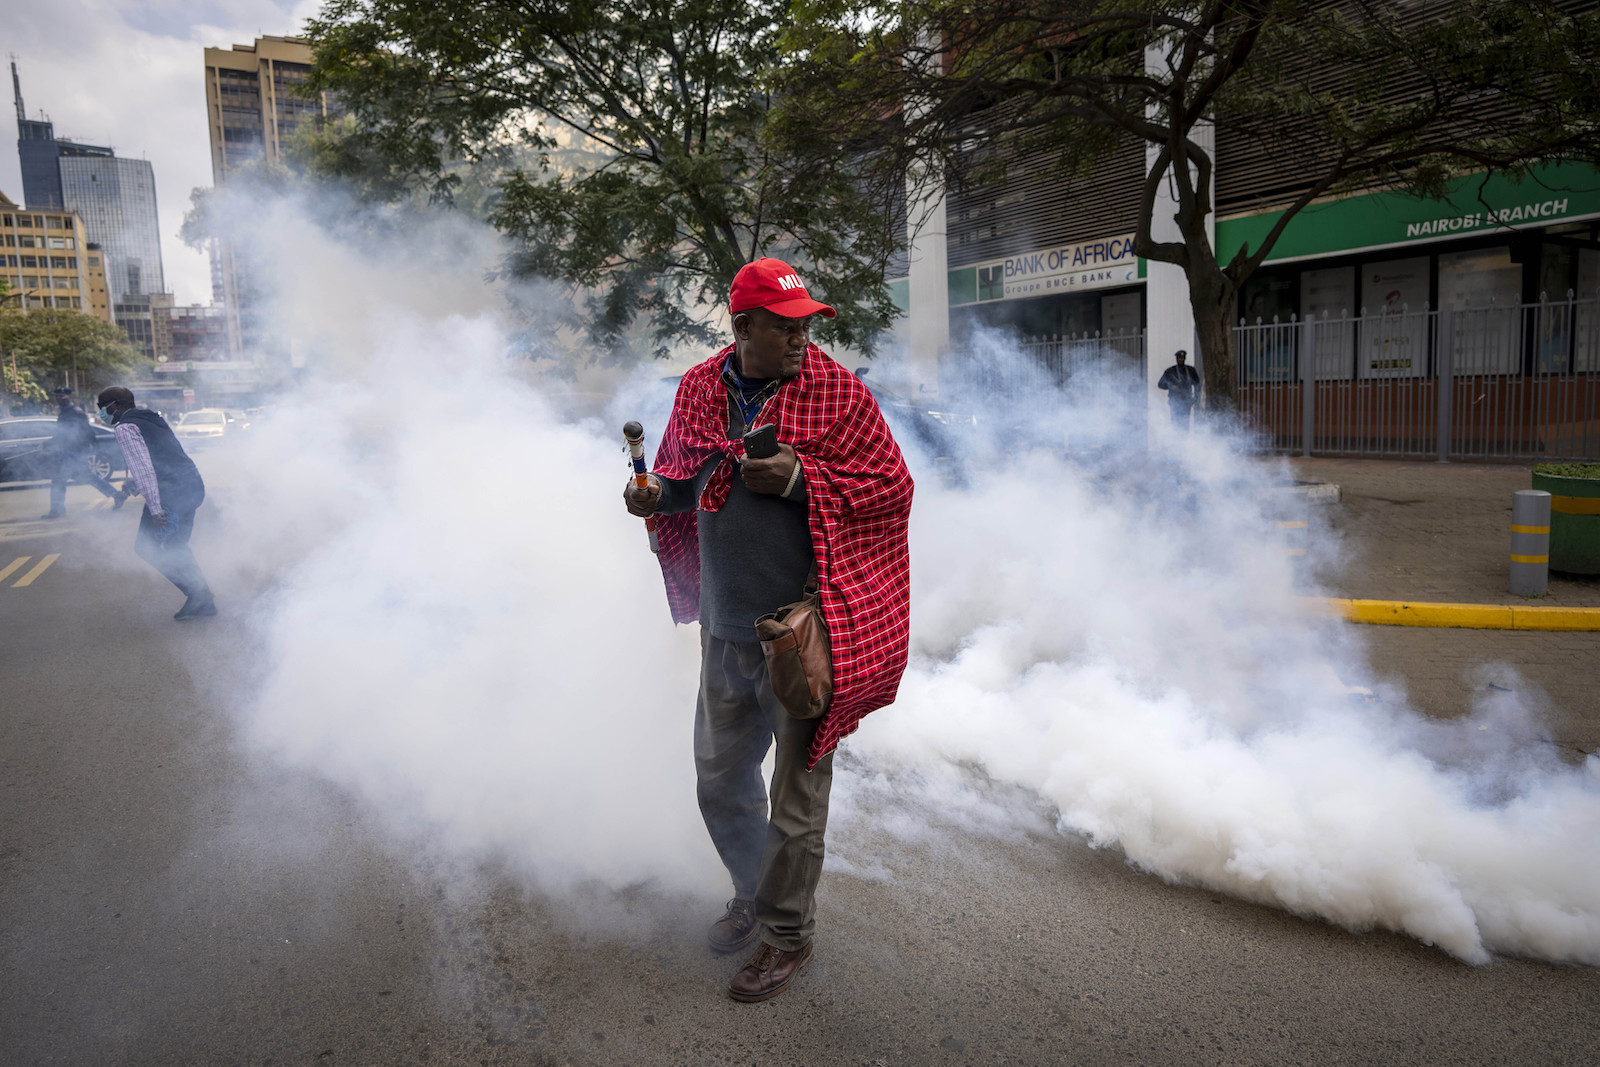 A person in a red baseball cap and draped in a red traditional Maasai cloth walks in the middle of a city street as white clouds of gas billow around him